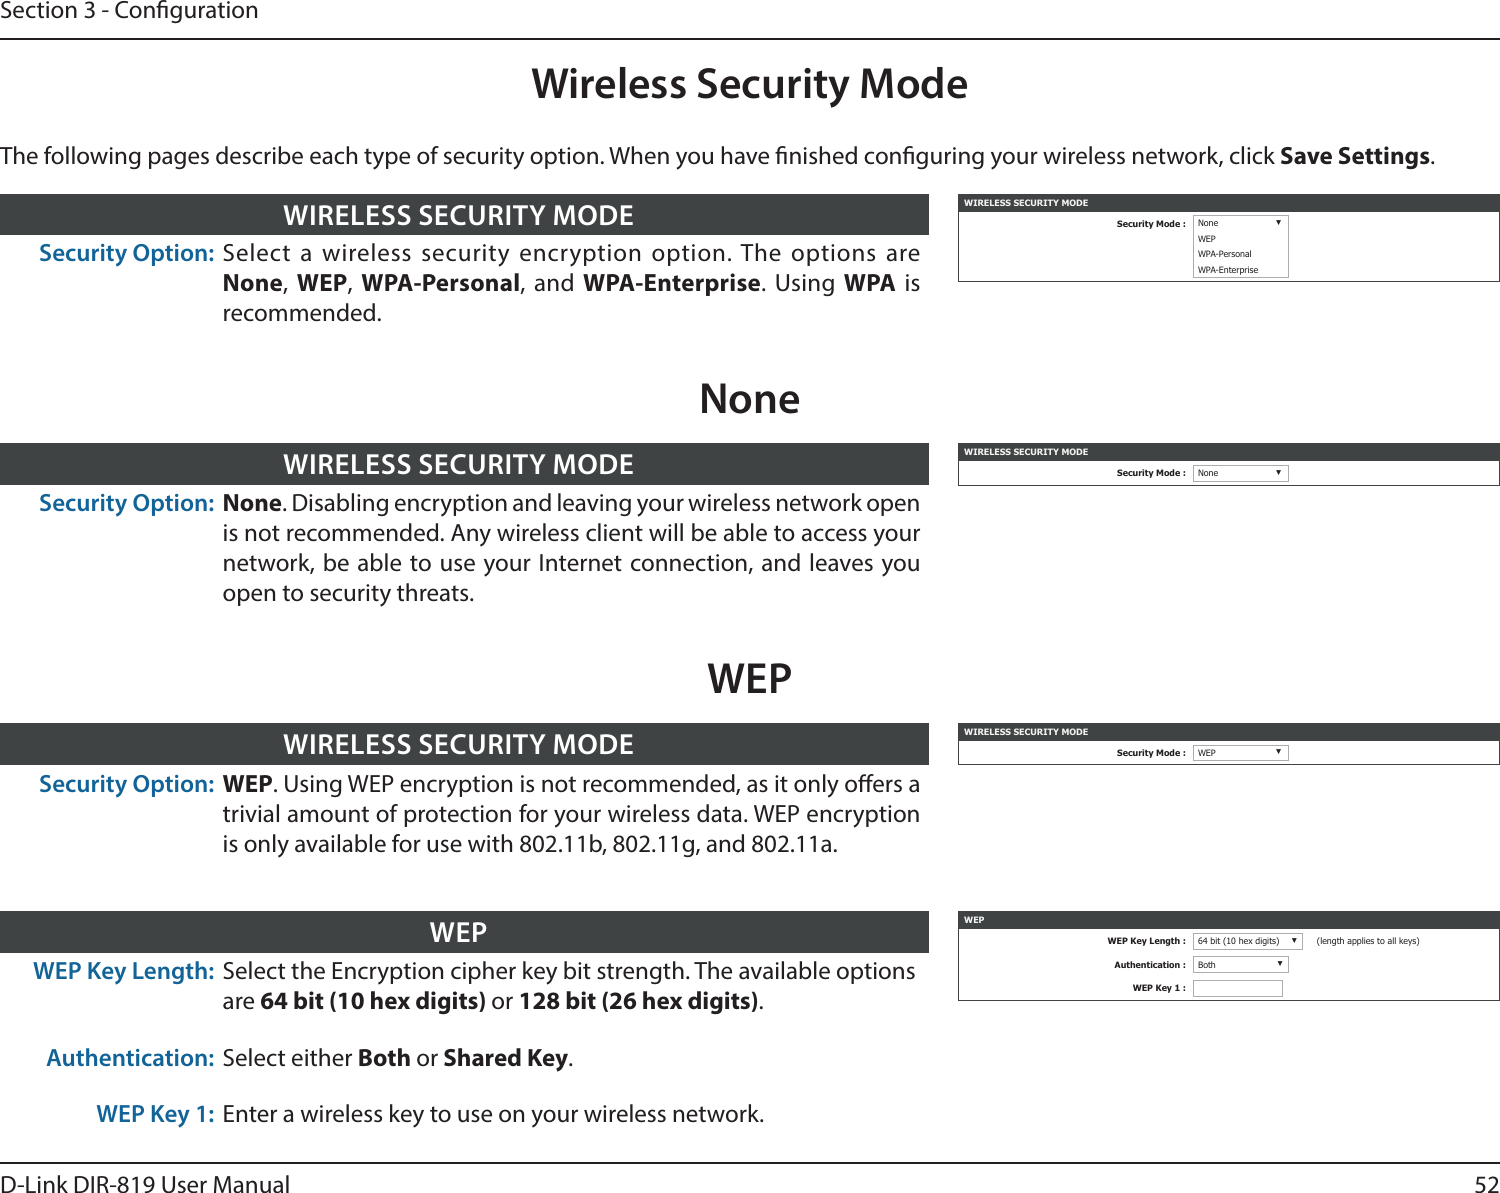 52D-Link DIR-819 User ManualSection 3 - CongurationWireless Security ModeWIRELESS SECURITY MODESecurity Mode : None ▼WEPWPA-PersonalWPA-EnterpriseSecurity Option: Select a wireless security encryption option. The options are None, WEP,  WPA-Personal, and WPA-Enterprise. Using WPA is recommended. WIRELESS SECURITY MODEWIRELESS SECURITY MODESecurity Mode : None ▼Security Option: None. Disabling encryption and leaving your wireless network open is not recommended. Any wireless client will be able to access your network, be able to use your Internet connection, and leaves you open to security threats.WIRELESS SECURITY MODENoneThe following pages describe each type of security option. When you have nished conguring your wireless network, click Save Settings.WIRELESS SECURITY MODESecurity Mode : WEP ▼Security Option: WEP. Using WEP encryption is not recommended, as it only oers a trivial amount of protection for your wireless data. WEP encryption is only available for use with 802.11b, 802.11g, and 802.11a.WIRELESS SECURITY MODEWEPWEP Key Length: Select the Encryption cipher key bit strength. The available optionsare 64 bit (10 hex digits) or 128 bit (26 hex digits).Authentication: Select either Both or Shared Key.WEP Key 1: Enter a wireless key to use on your wireless network.WEP WEPWEP Key Length : 64 bit (10 hex digits) ▼(length applies to all keys)Authentication : Both ▼WEP Key 1 :